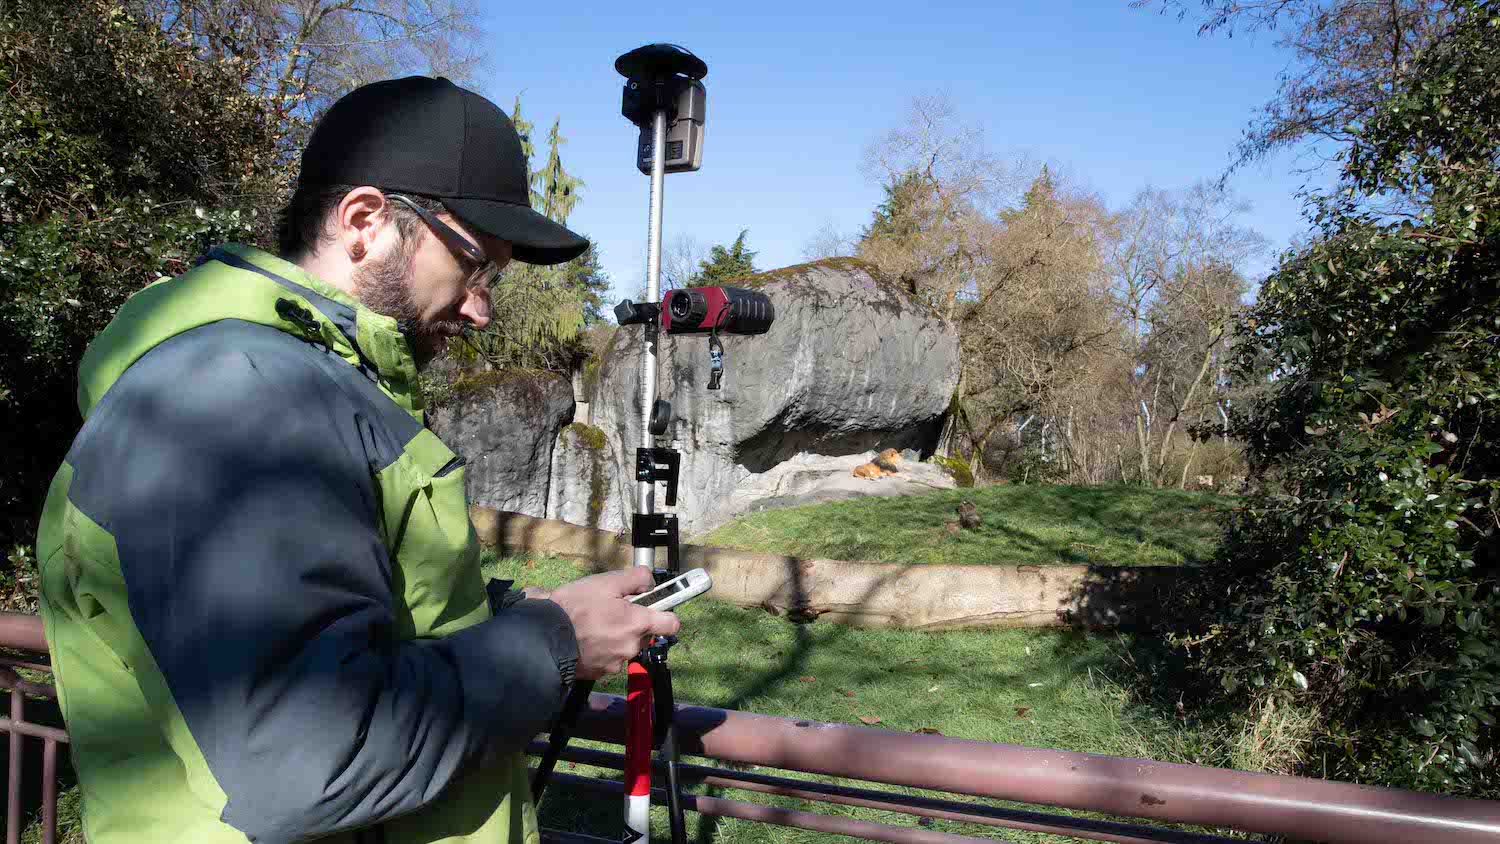 Dann Block maps zoo assets safely from afar using Arrow 100 GNSS and Eos laser mapping for ArcGIS Collector on iOS